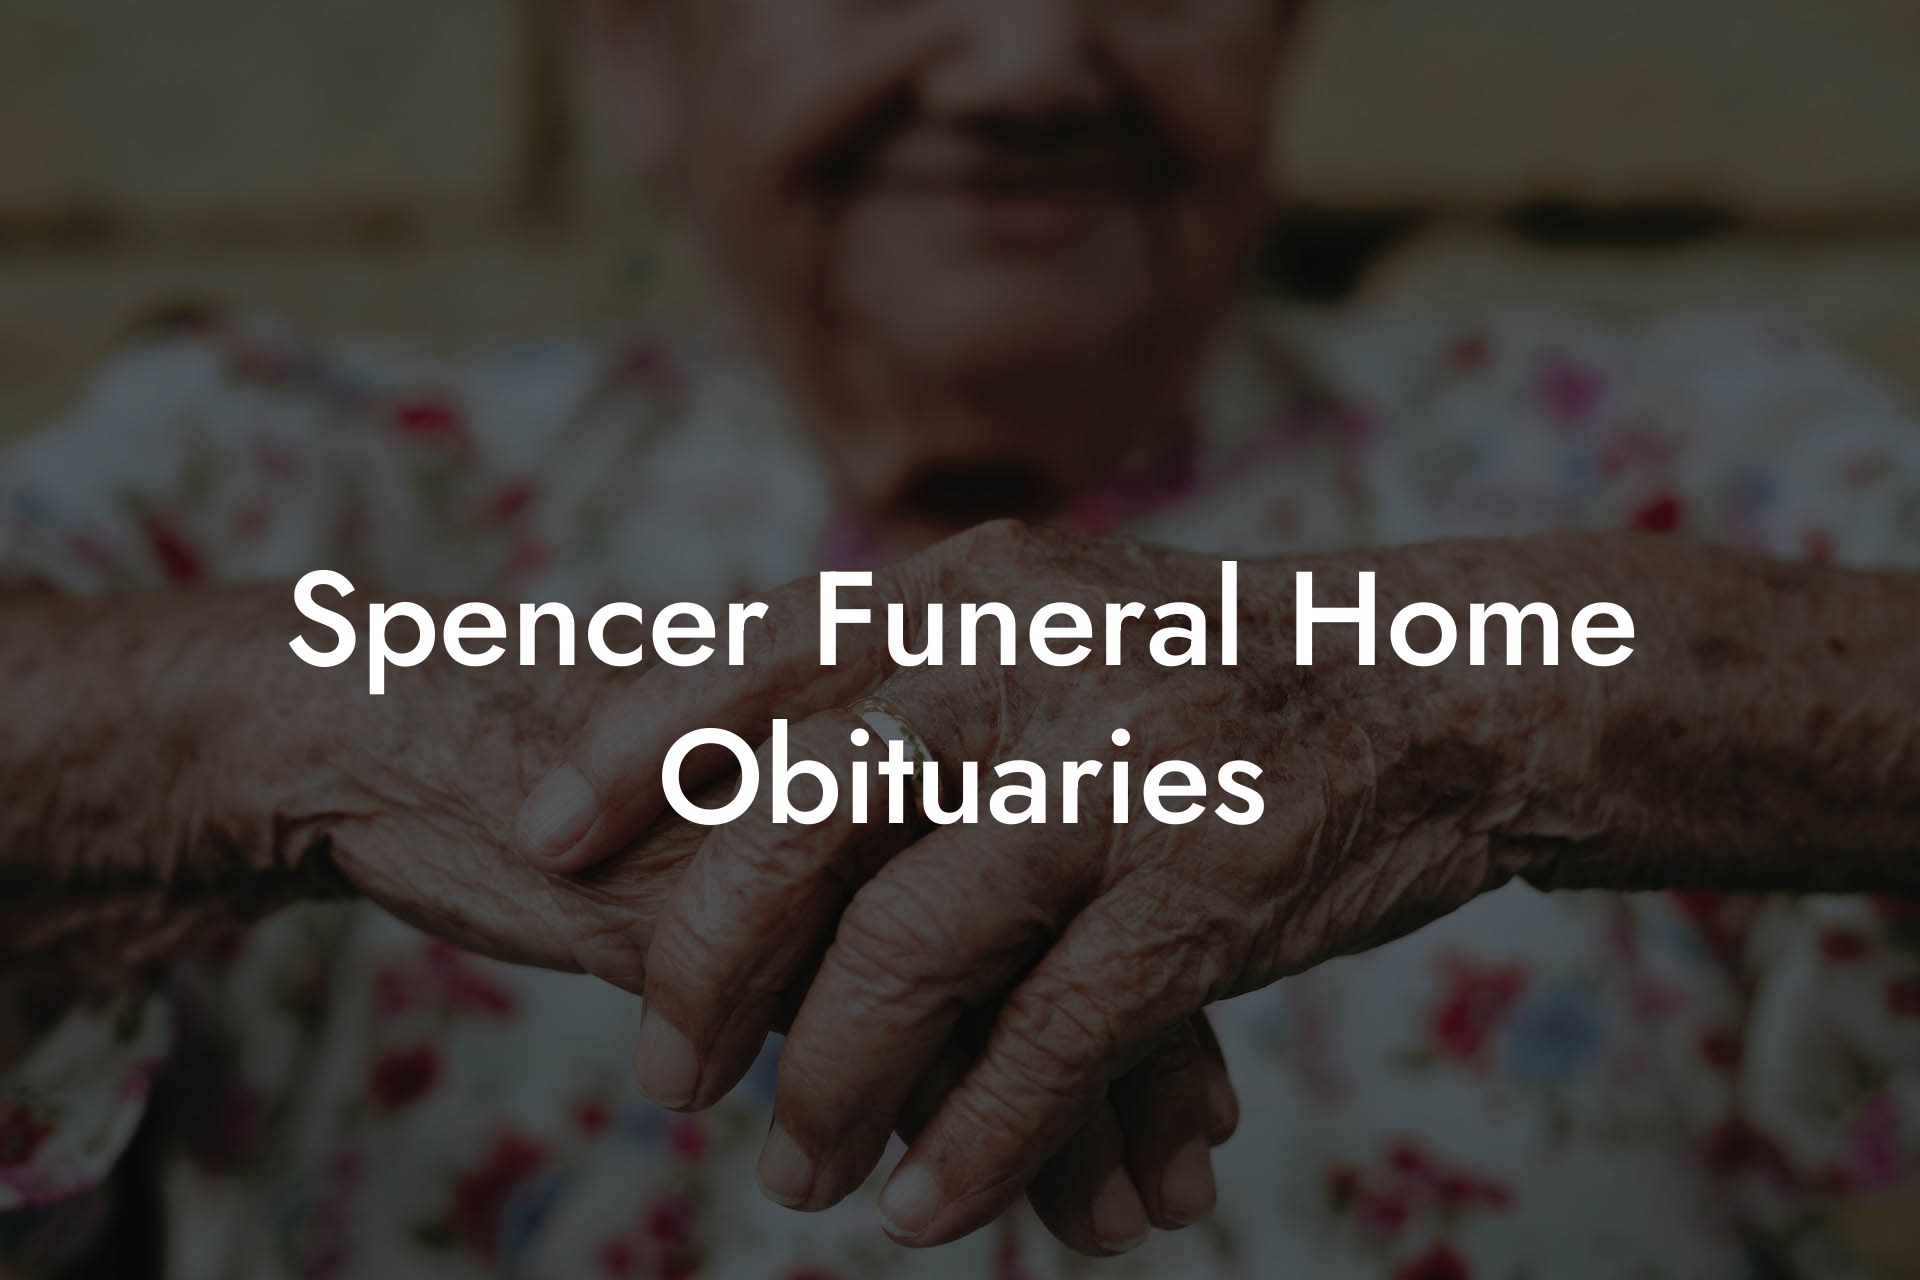 Spencer Funeral Home Obituaries